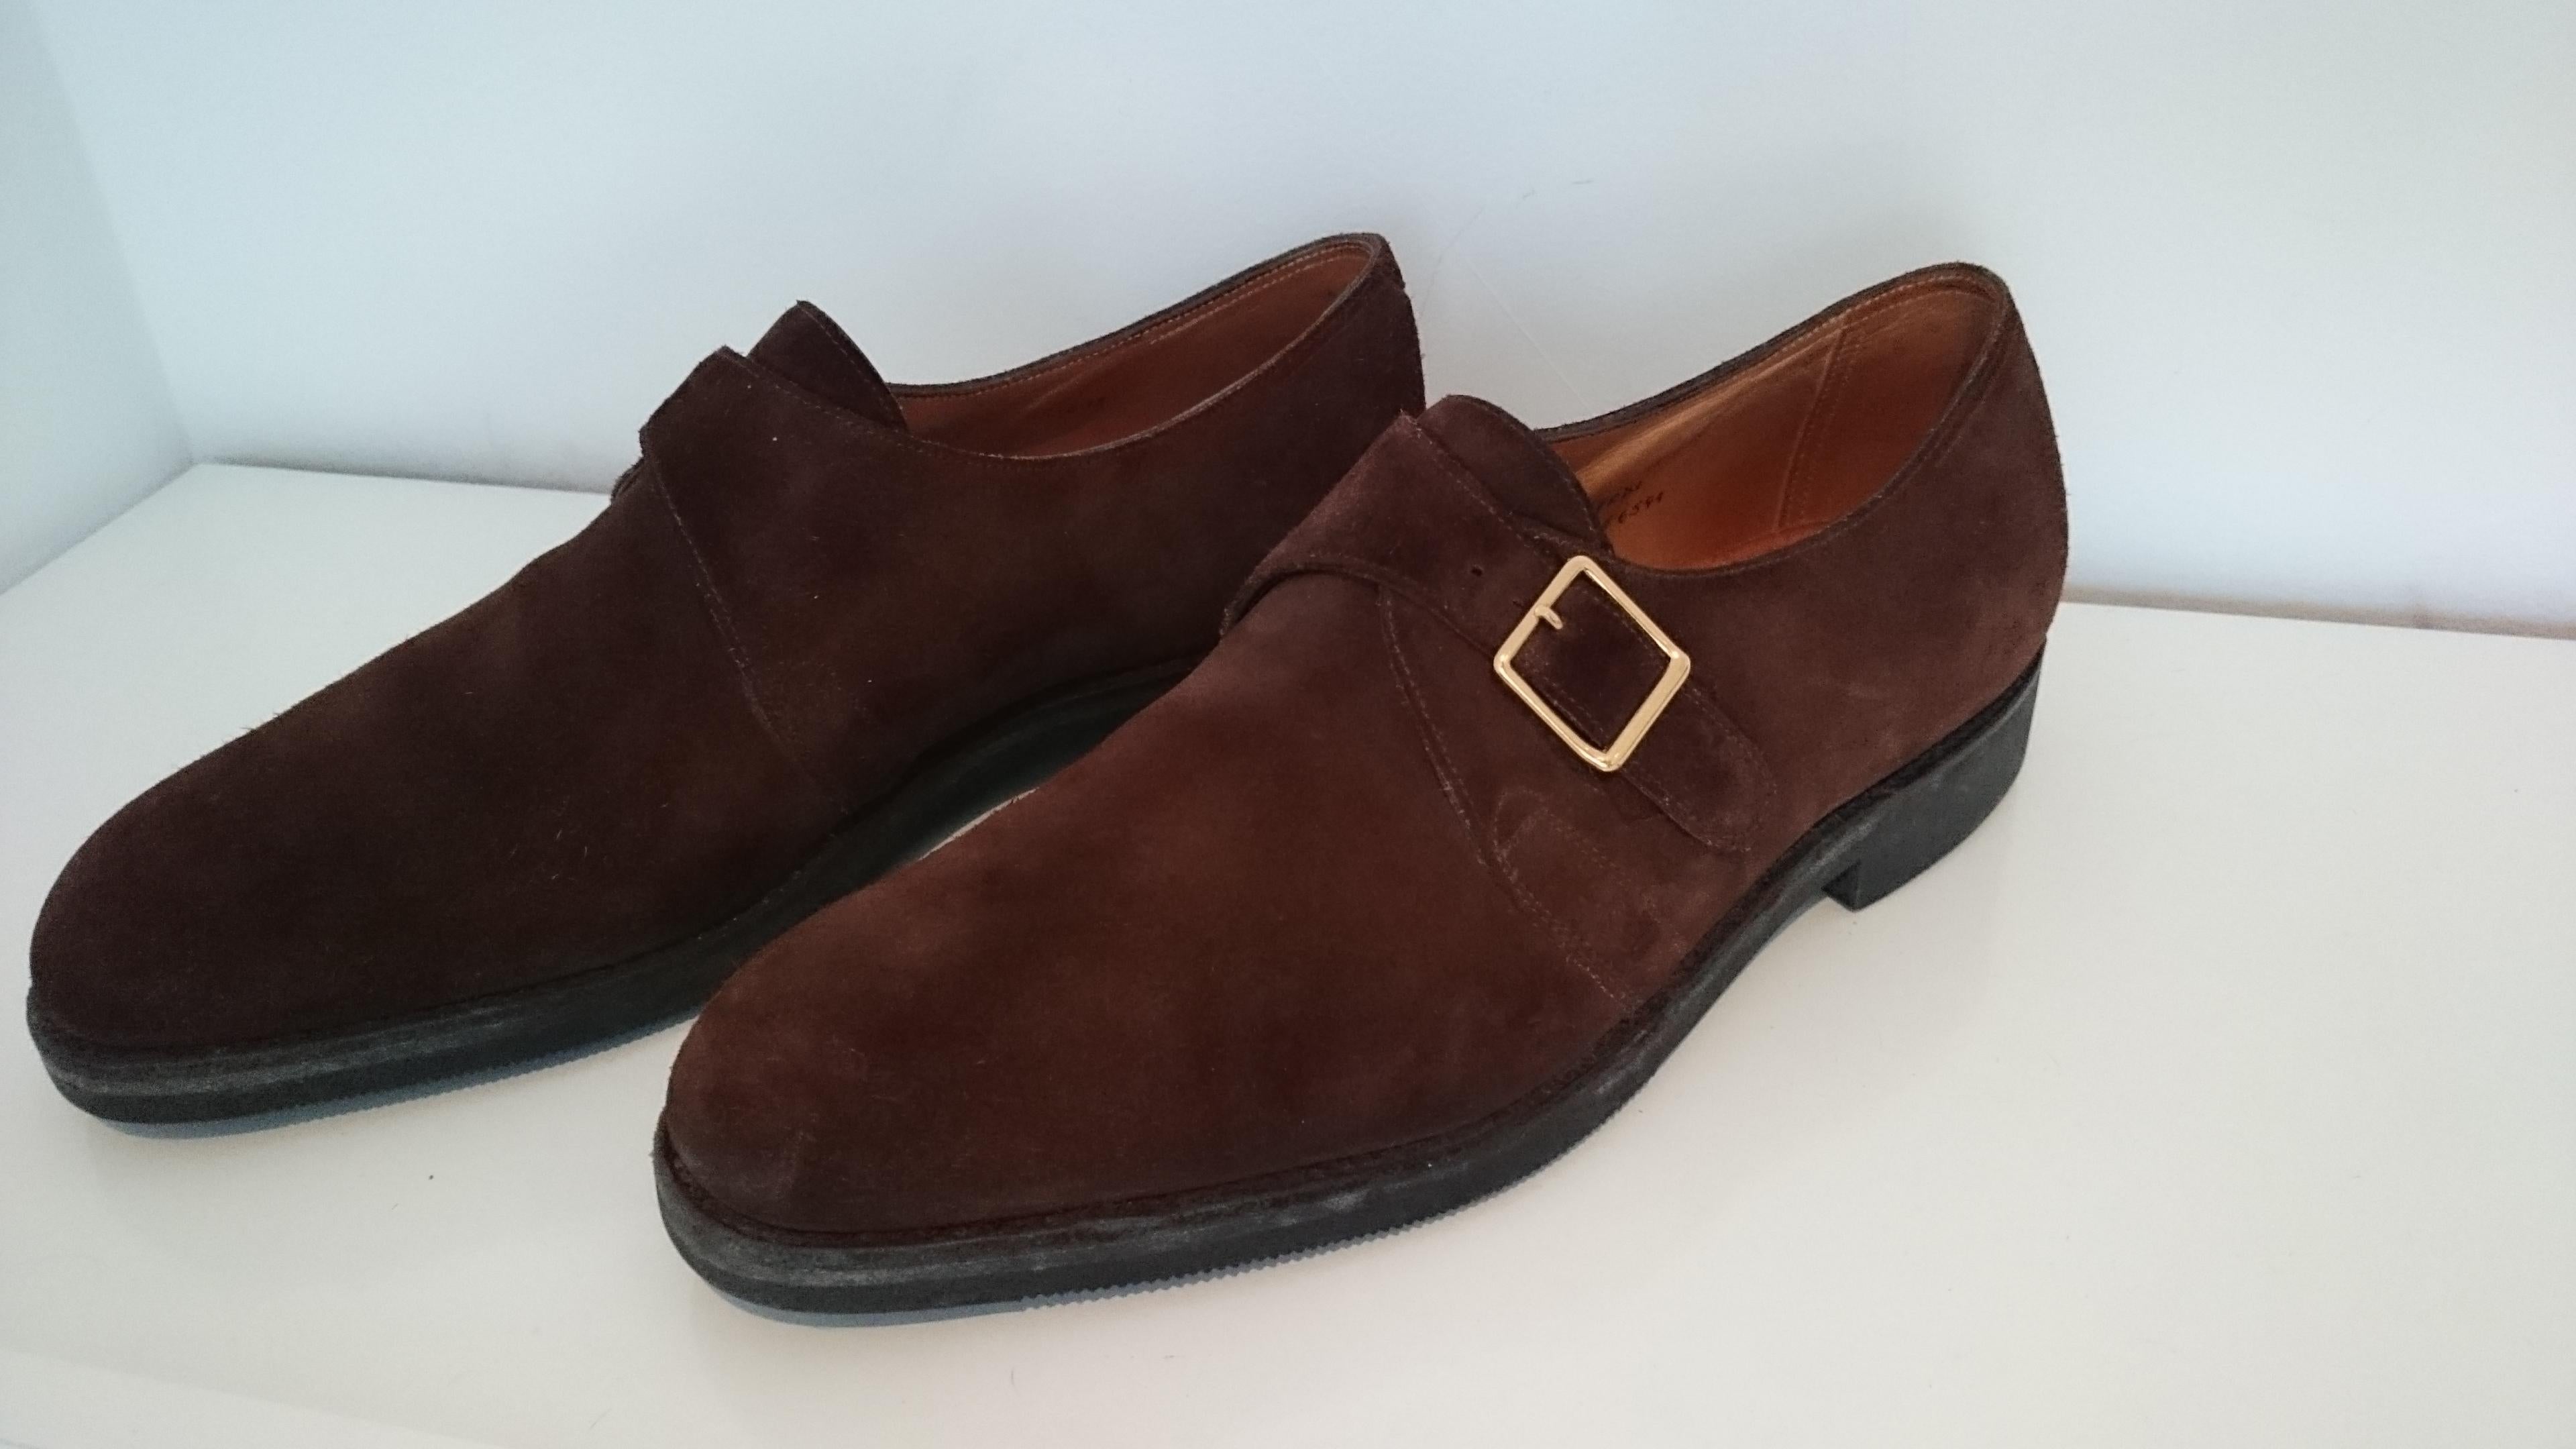 John Lobb Suede One-Strap Shoes.
Color: Brown
Great conditions.
Size: 41 1/2
Made in Great Britain